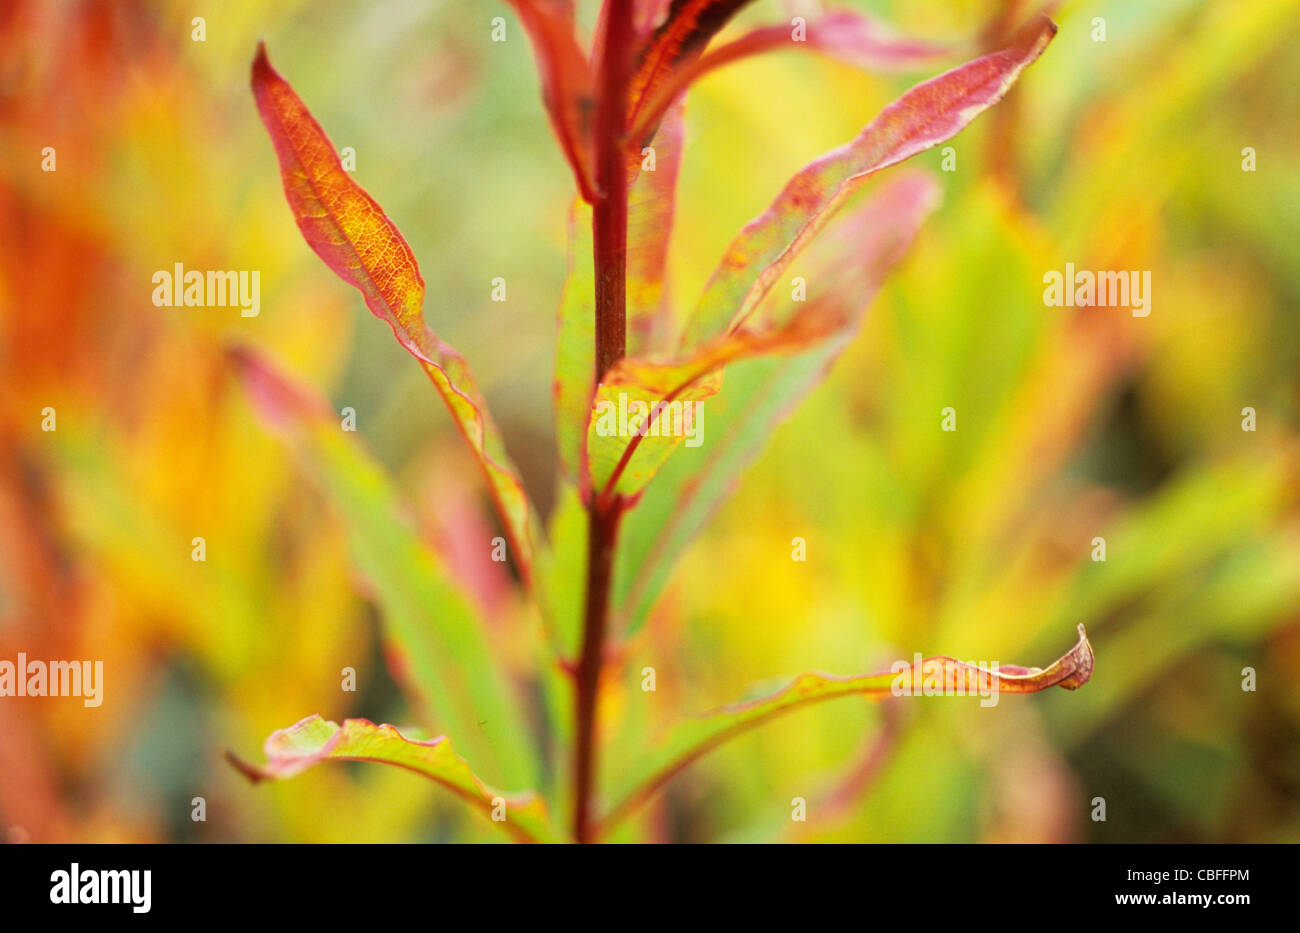 Close up of part of stem of Rosebay willowherb or Epilobium angustifolium with vivid yellow and red autumn leaves Stock Photo